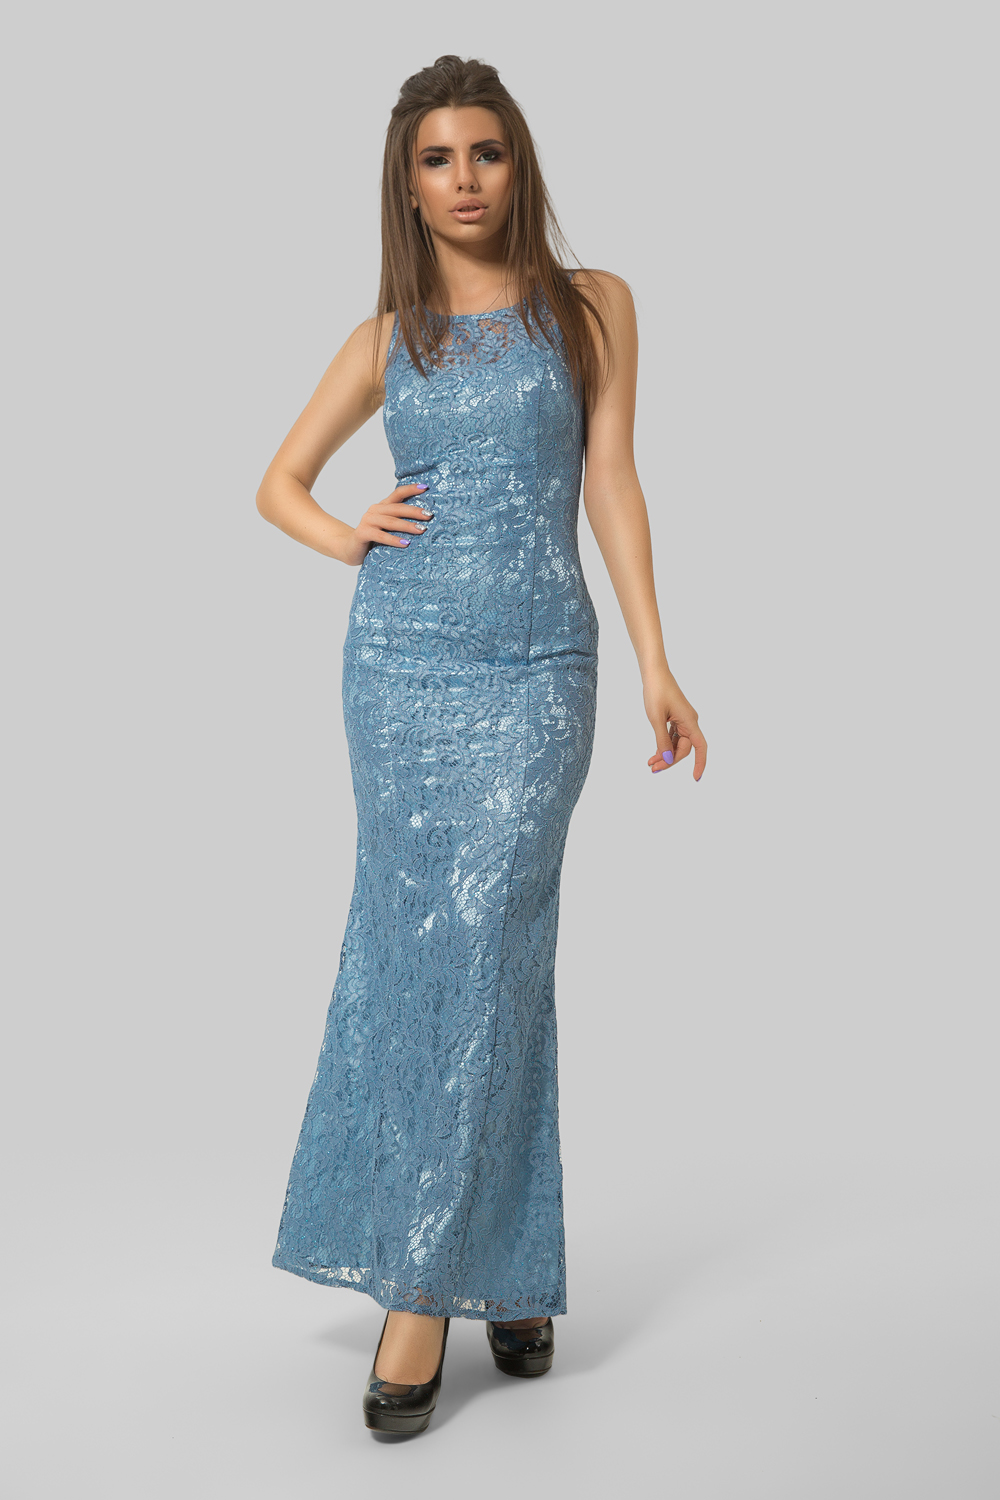 A floor-length evening dress in taupe and blue